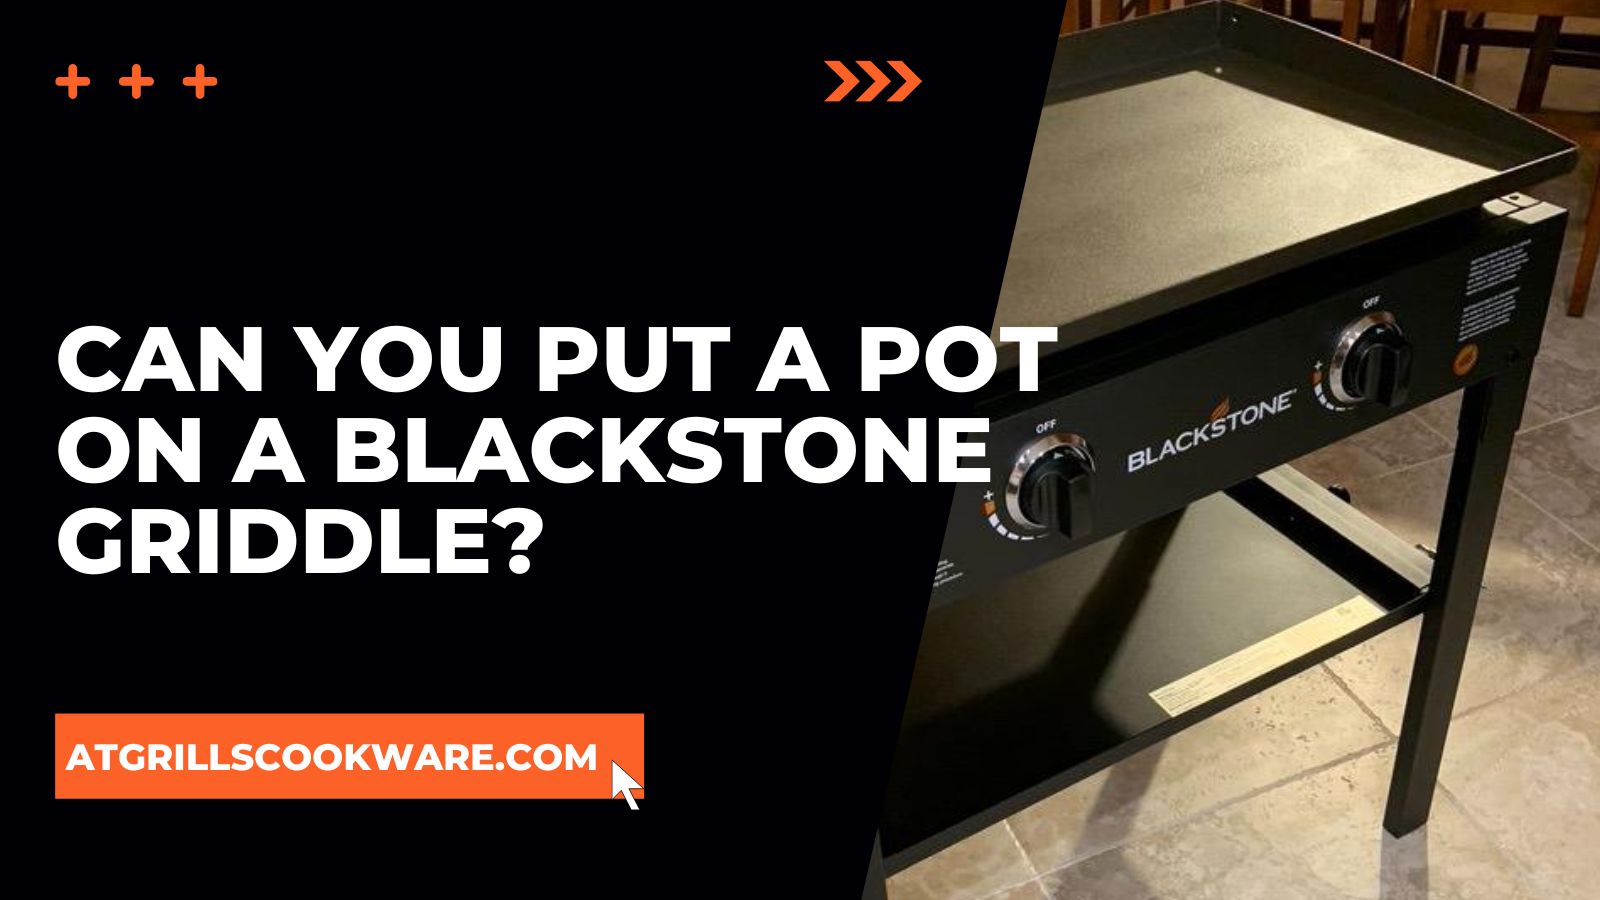 Can You Put A Pot on a Blackstone Griddle